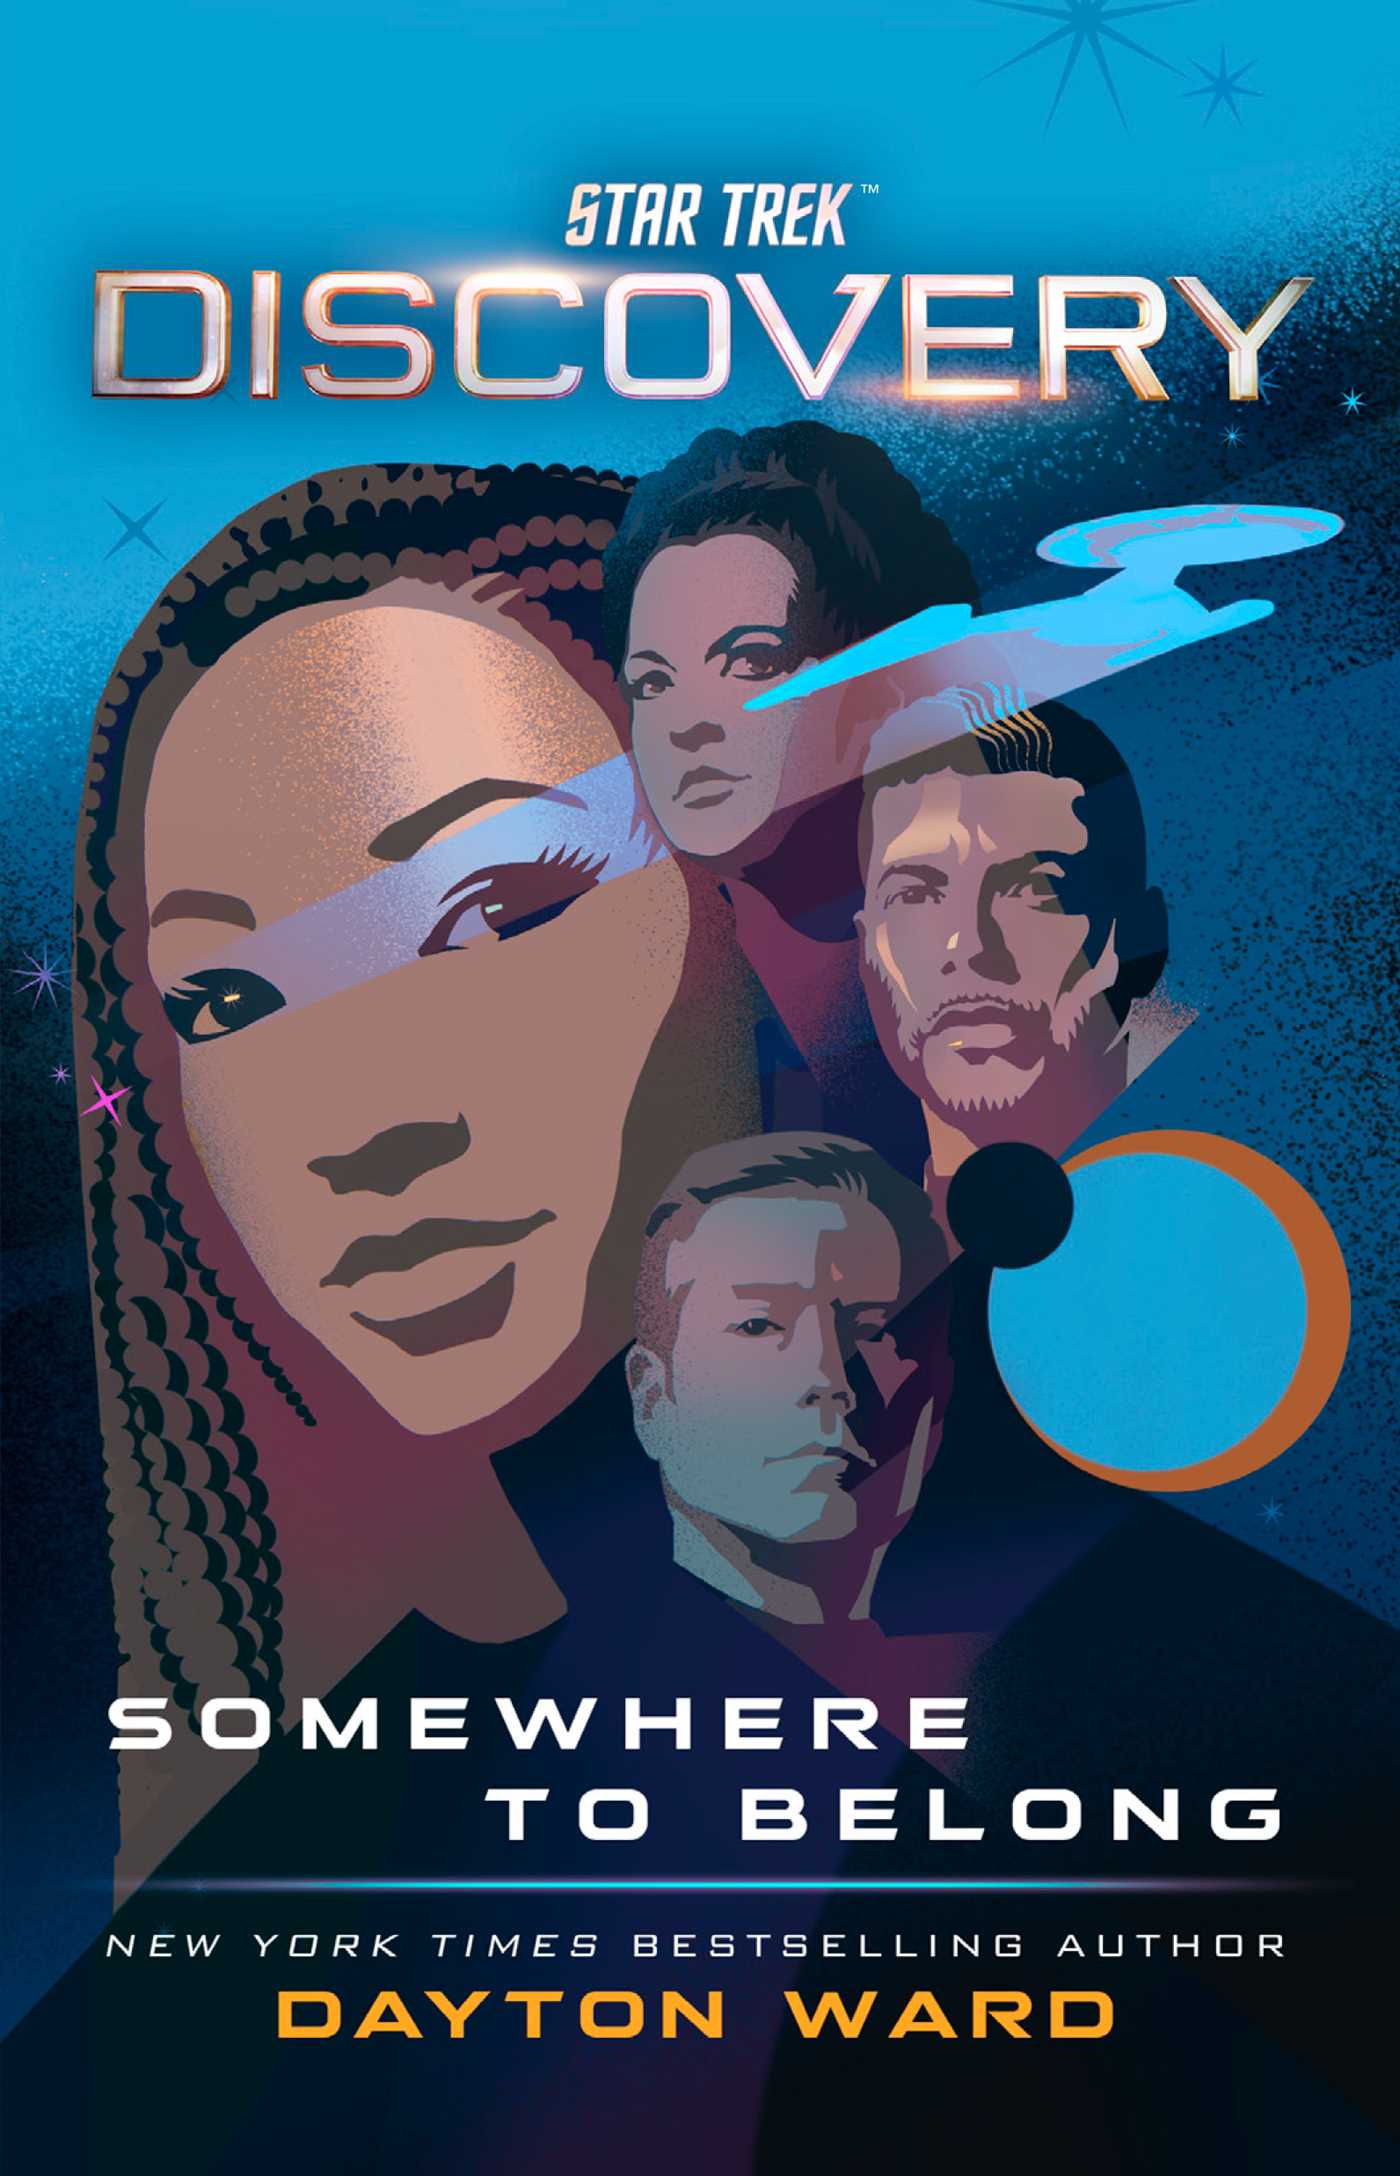 A book cover featuring the title 'Star Trek Discovery: Somewhere to Belong.' The cover showcases a cosmic backdrop with the iconic Starfleet insignia, a vibrant blend of blue and purple hues, and the silhouette of a starship soaring through the stars. There are 4 people on the cover. The largest is the face of a young Black woman with long braids. The other 3 are in a semicircle around her and depict a young white woman with curly hair, a young Hispanic man with goatee and short hair, and a cleanshaven white man with blonde hair.